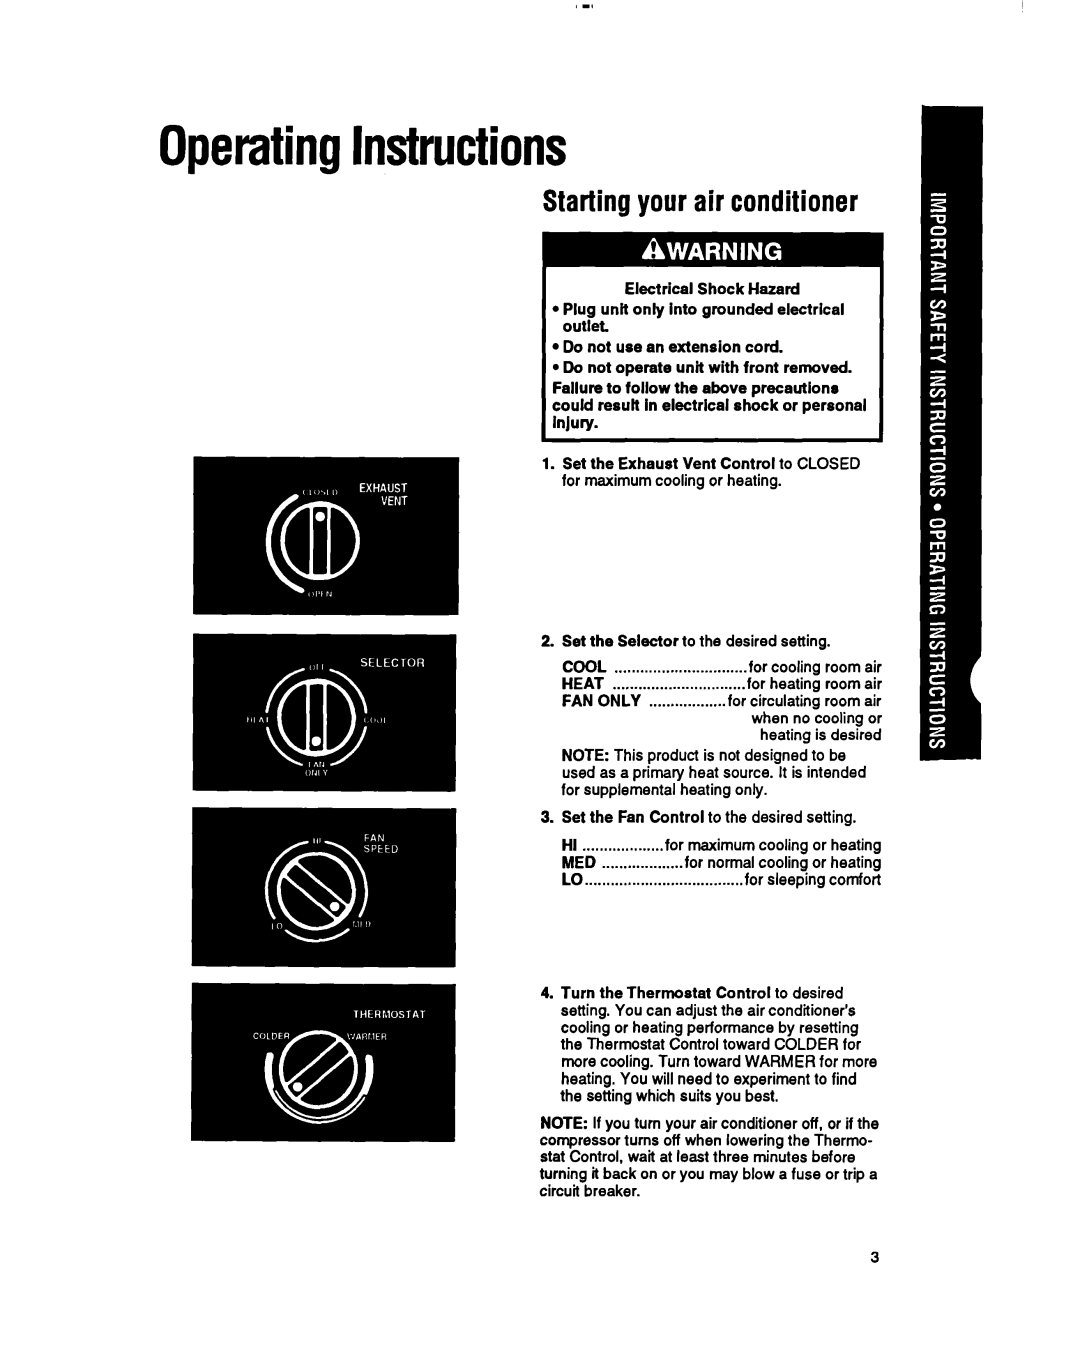 Whirlpool RH123A1 manual OperatingInstructions, Startingyour air conditioner 